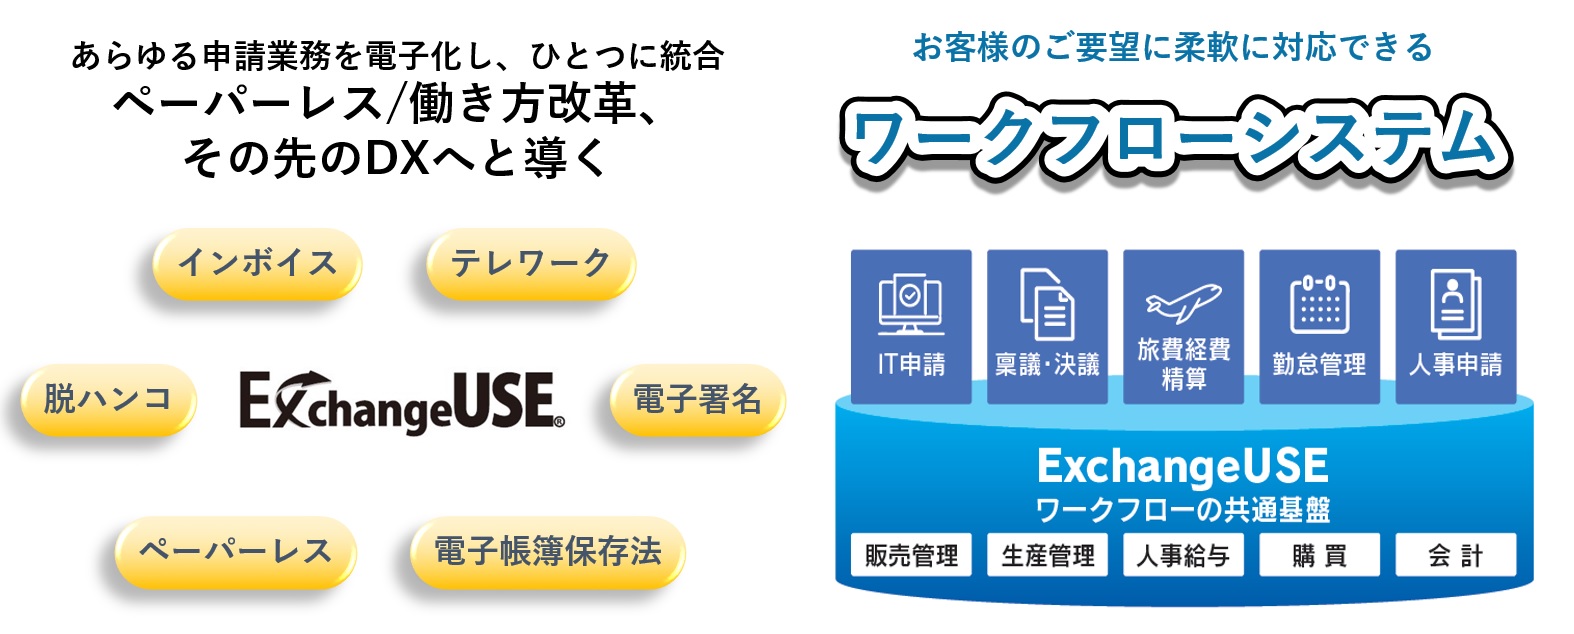 ExchangeUSE